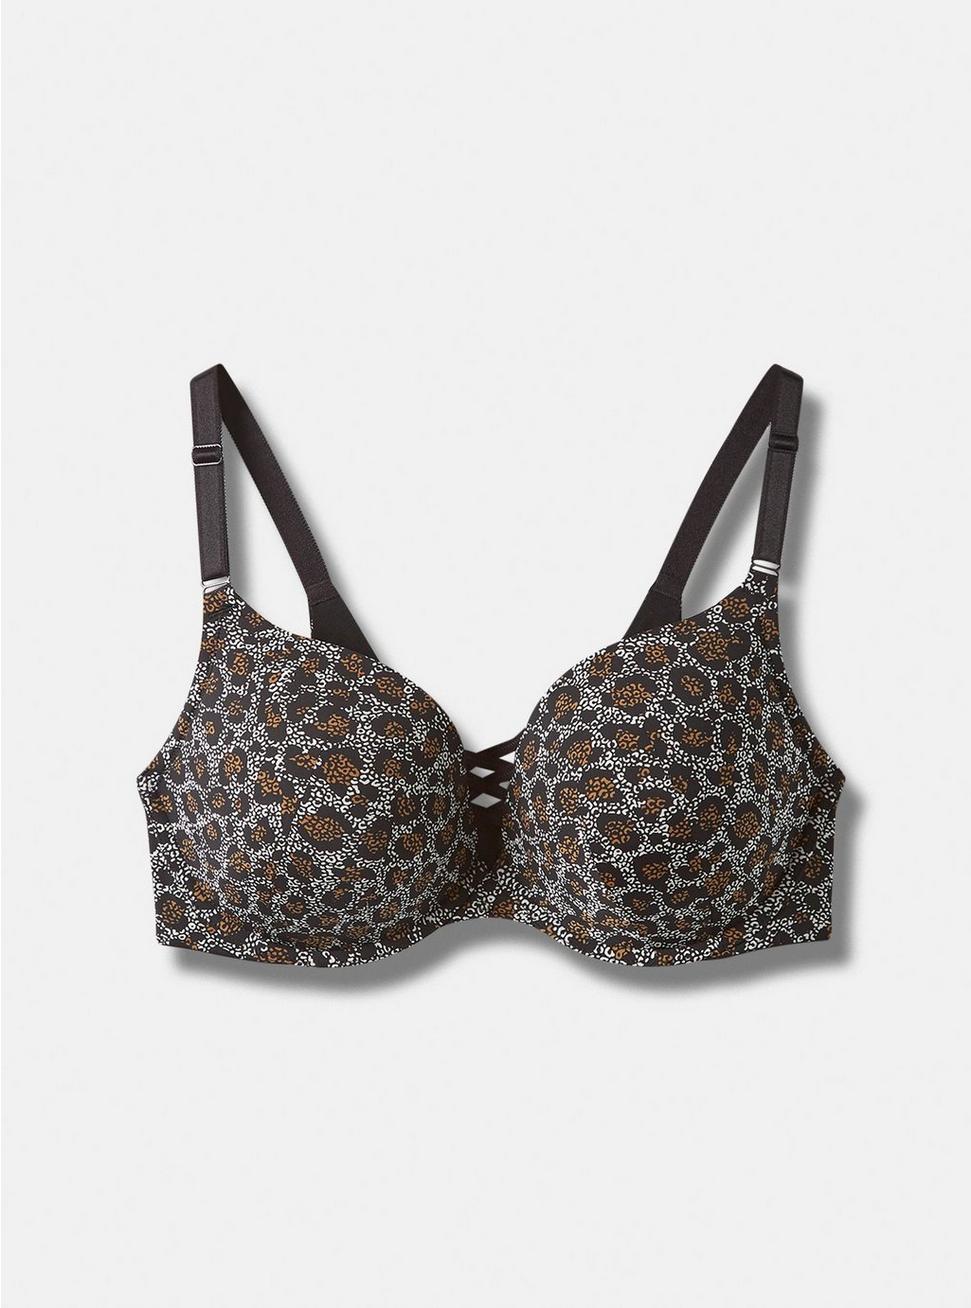 XO Plunge Smooth 360° Back Smoothing® Bra, DOUBLE LEOPARD BLACK, hi-res